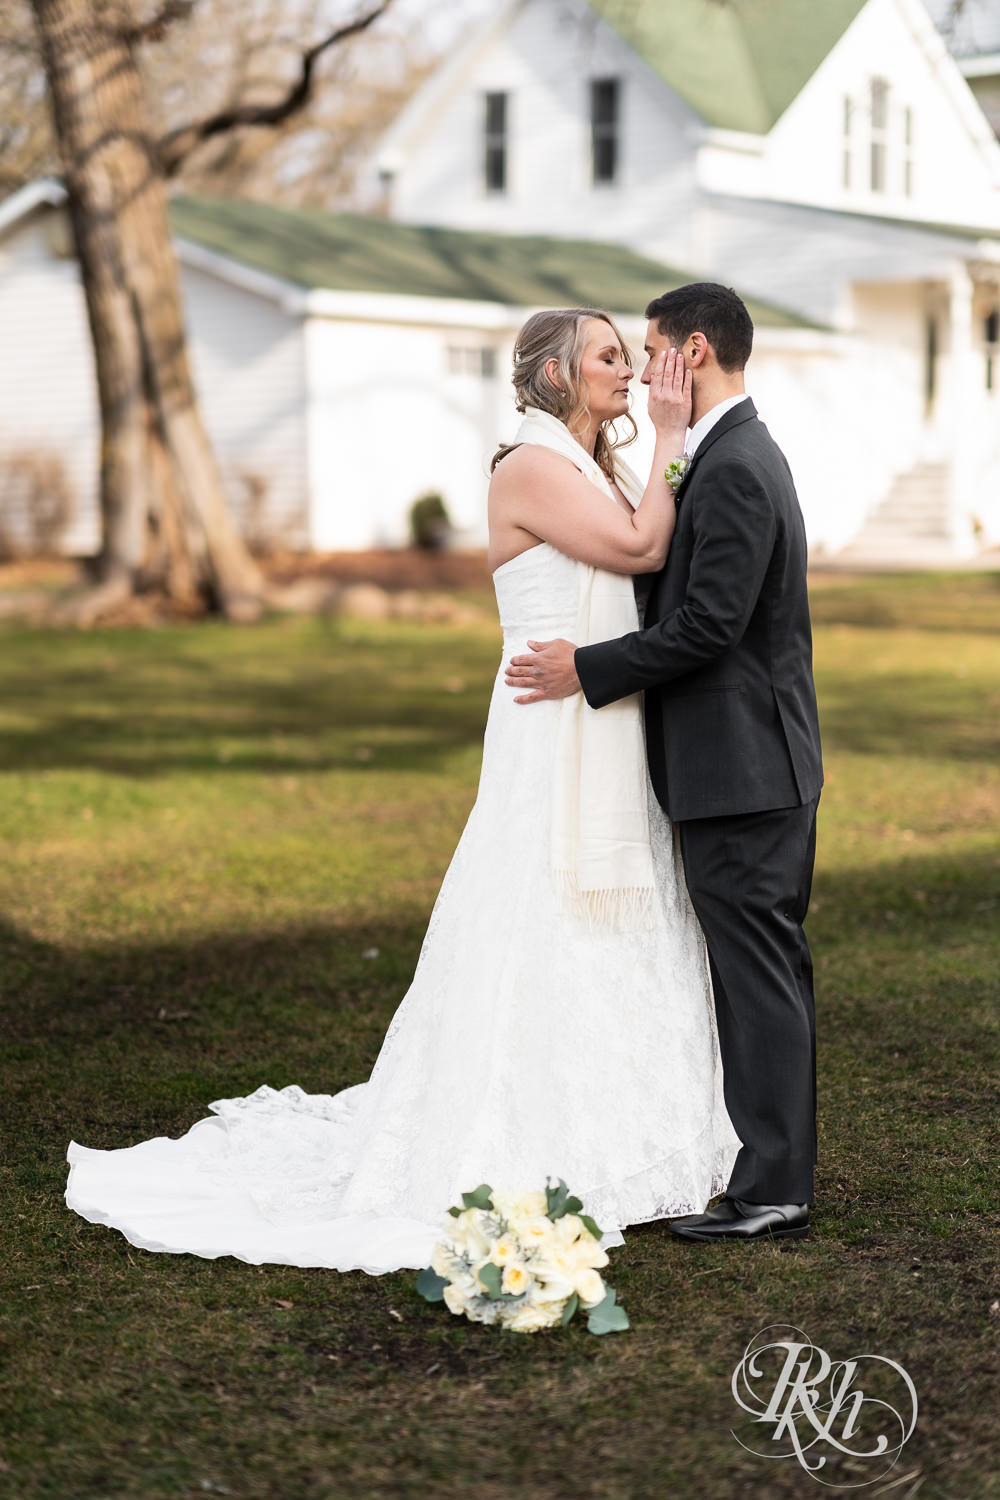 Bride and groom dance and kiss in front of a white farmhouse at Almquist Farm in Hastings, Minnesota.